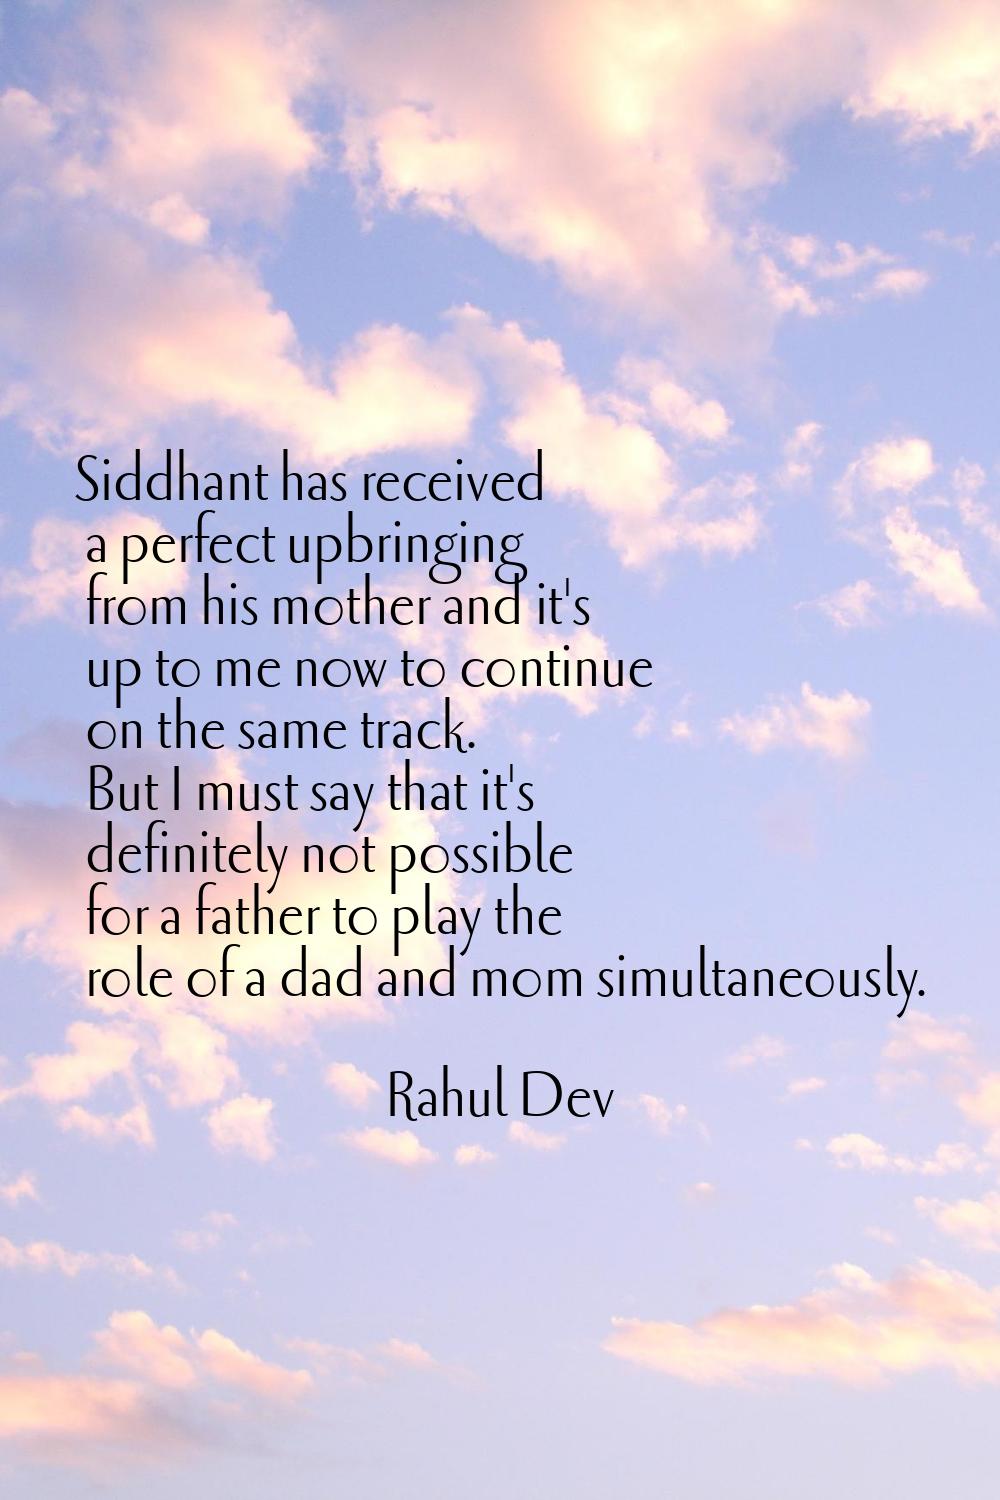 Siddhant has received a perfect upbringing from his mother and it's up to me now to continue on the